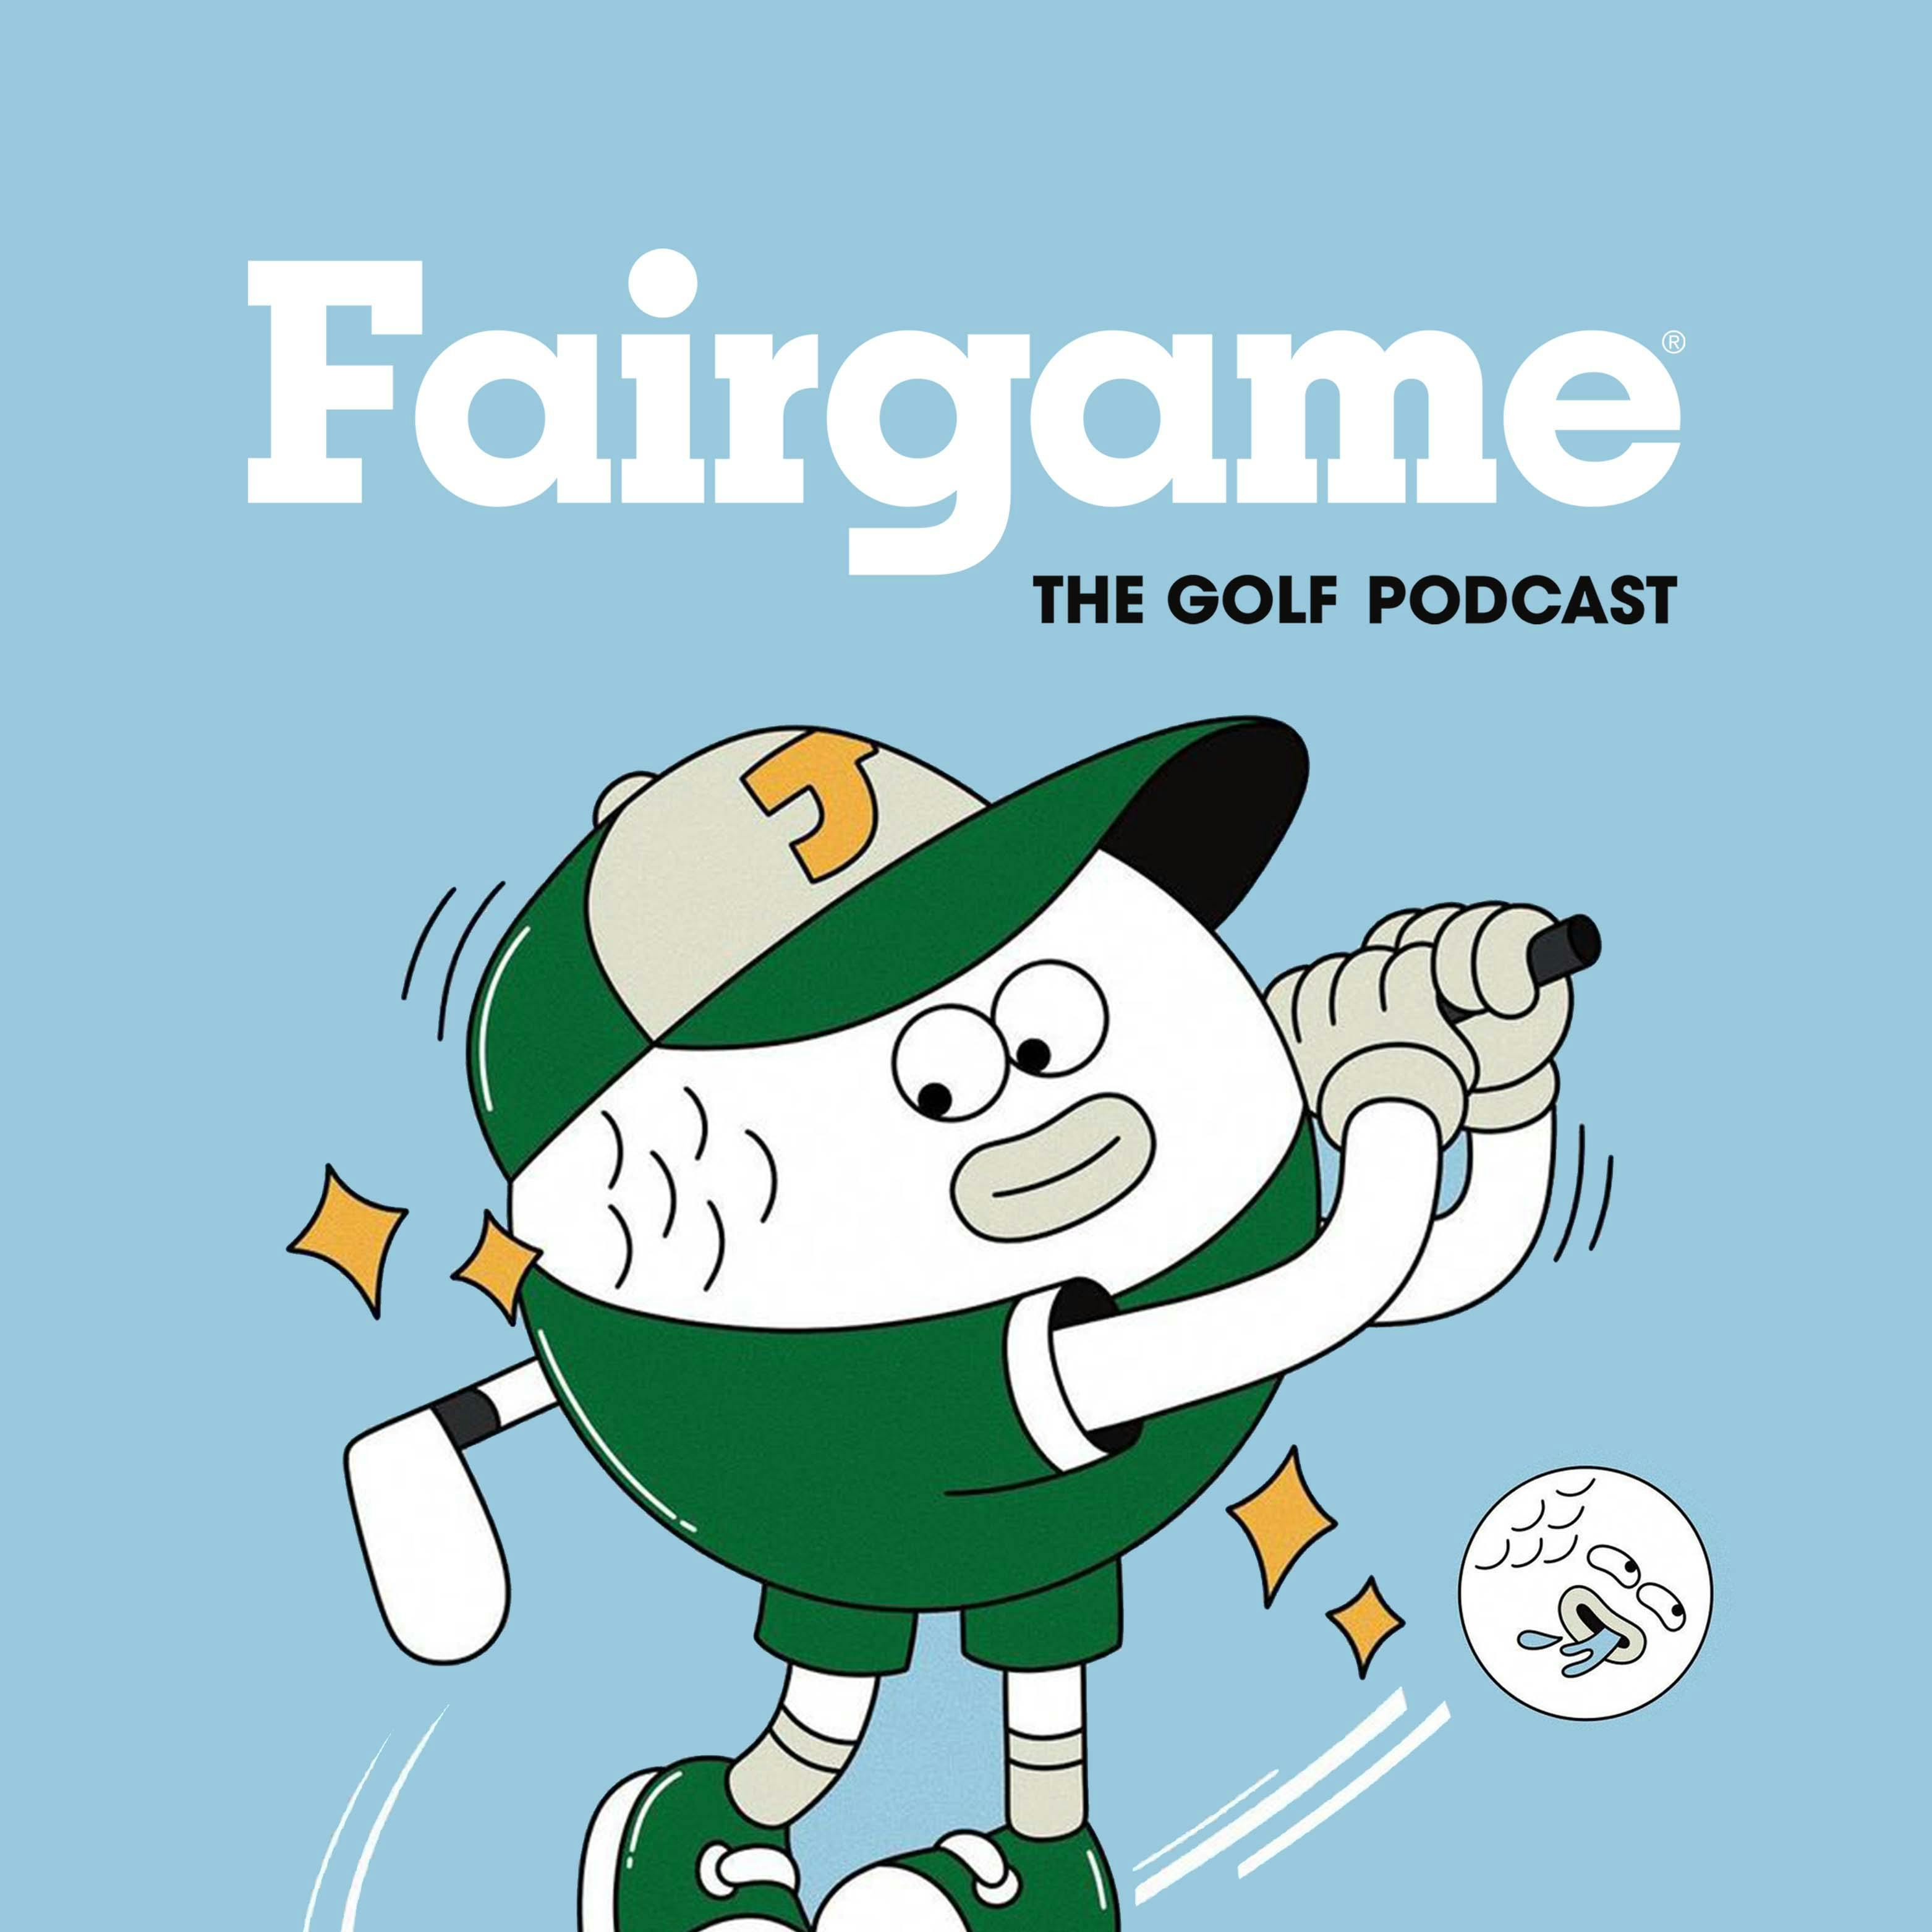 Episode 32: Getting to Know Golf’s Emerging Brands